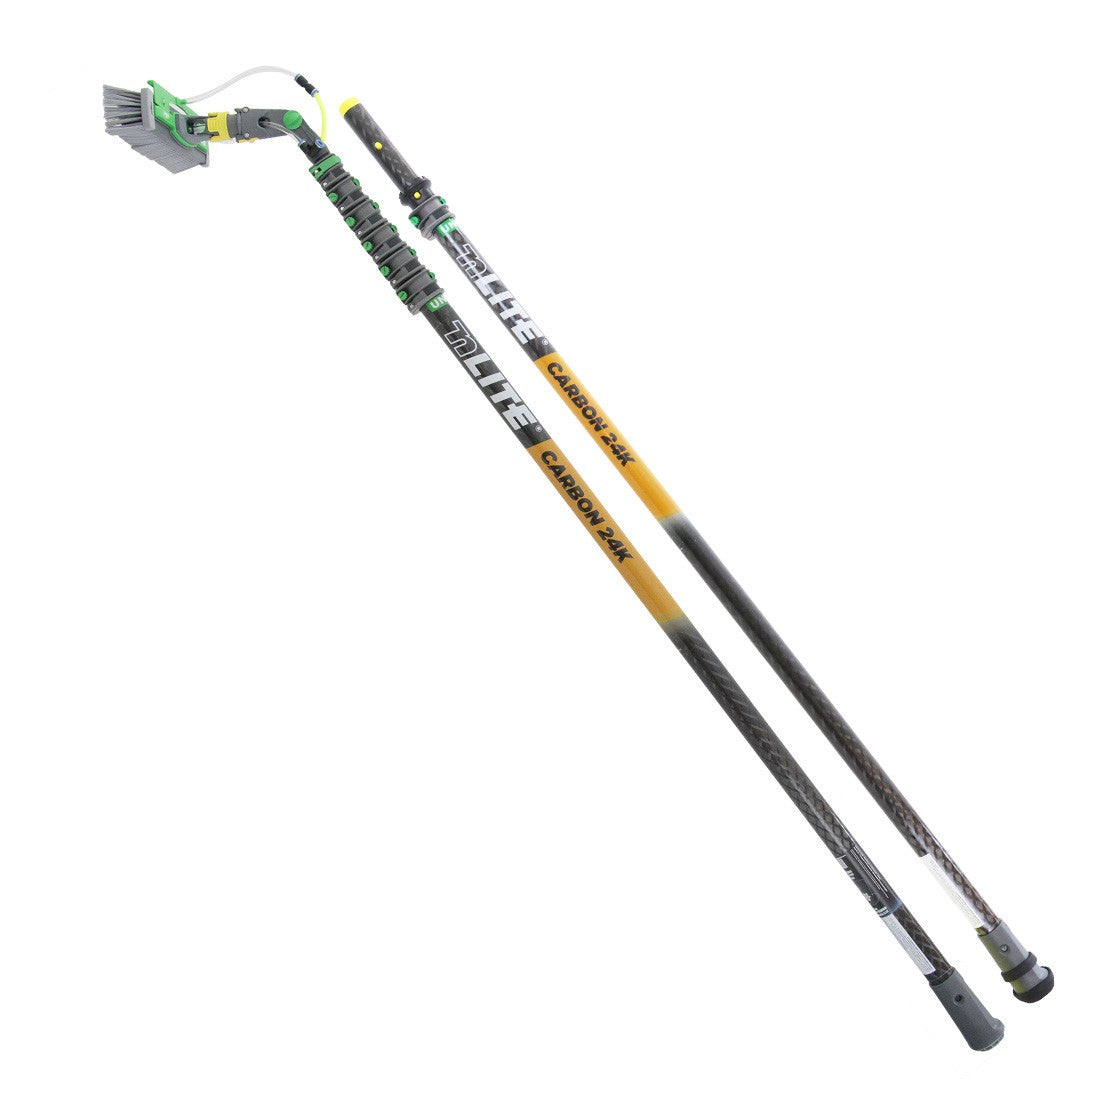 Unger nLite Carbon 24K Water Fed Pole Kit 38.5 Foot - 11 Inch Powerbrush Full View